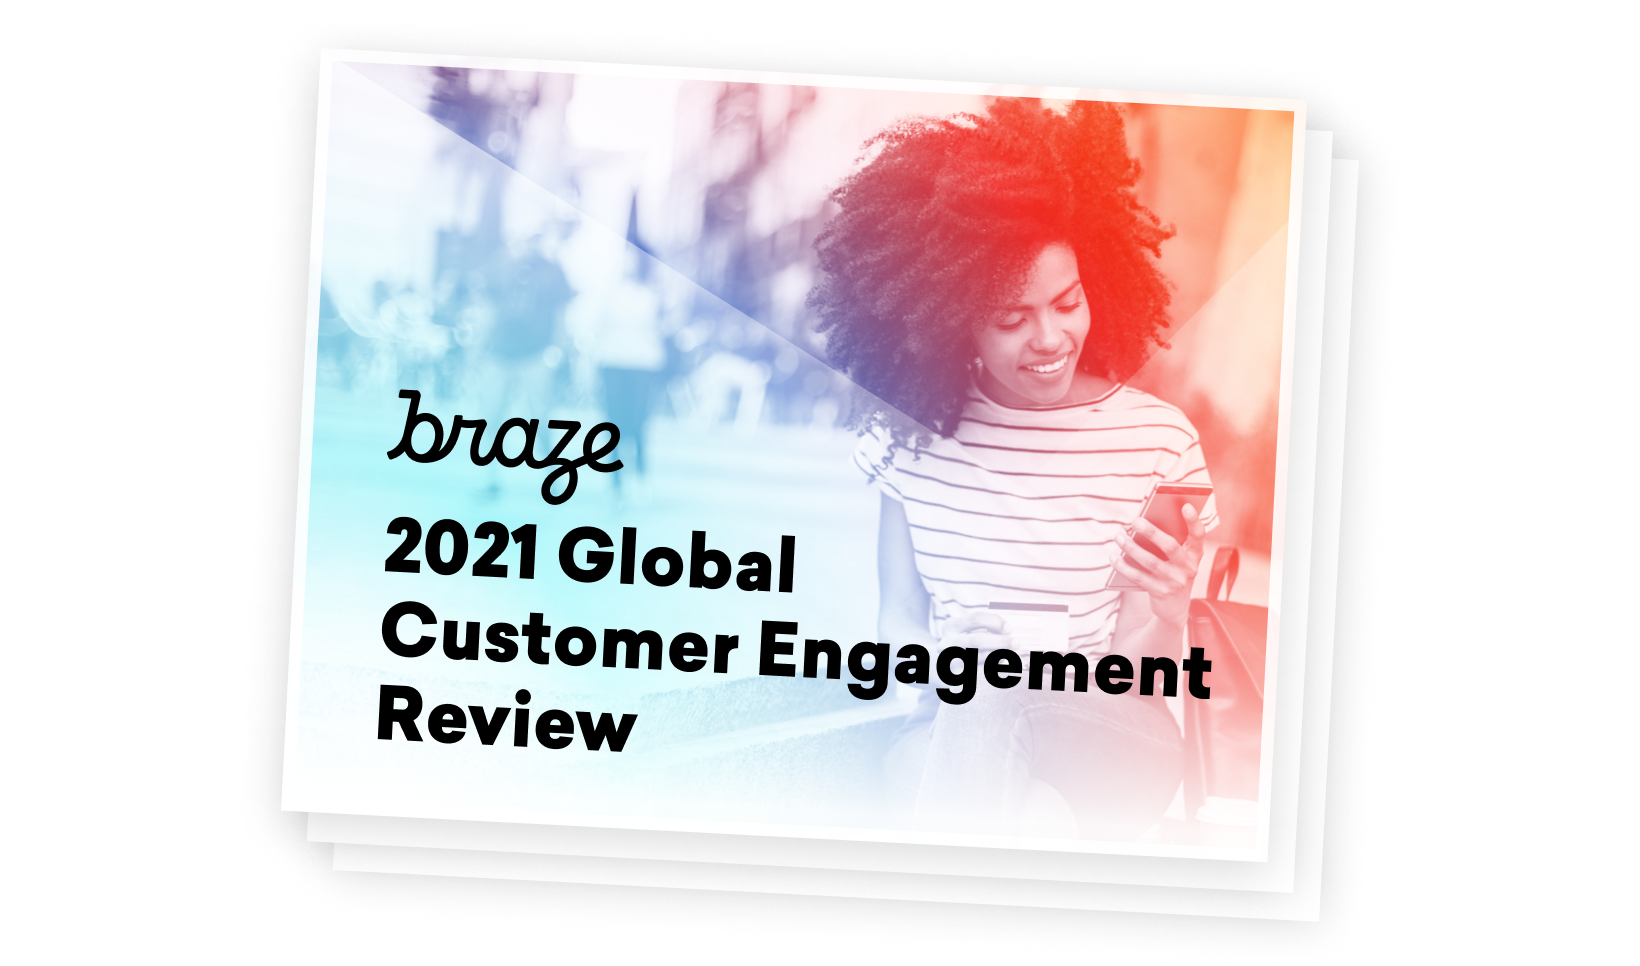 2021 Global Customer Engagement Review